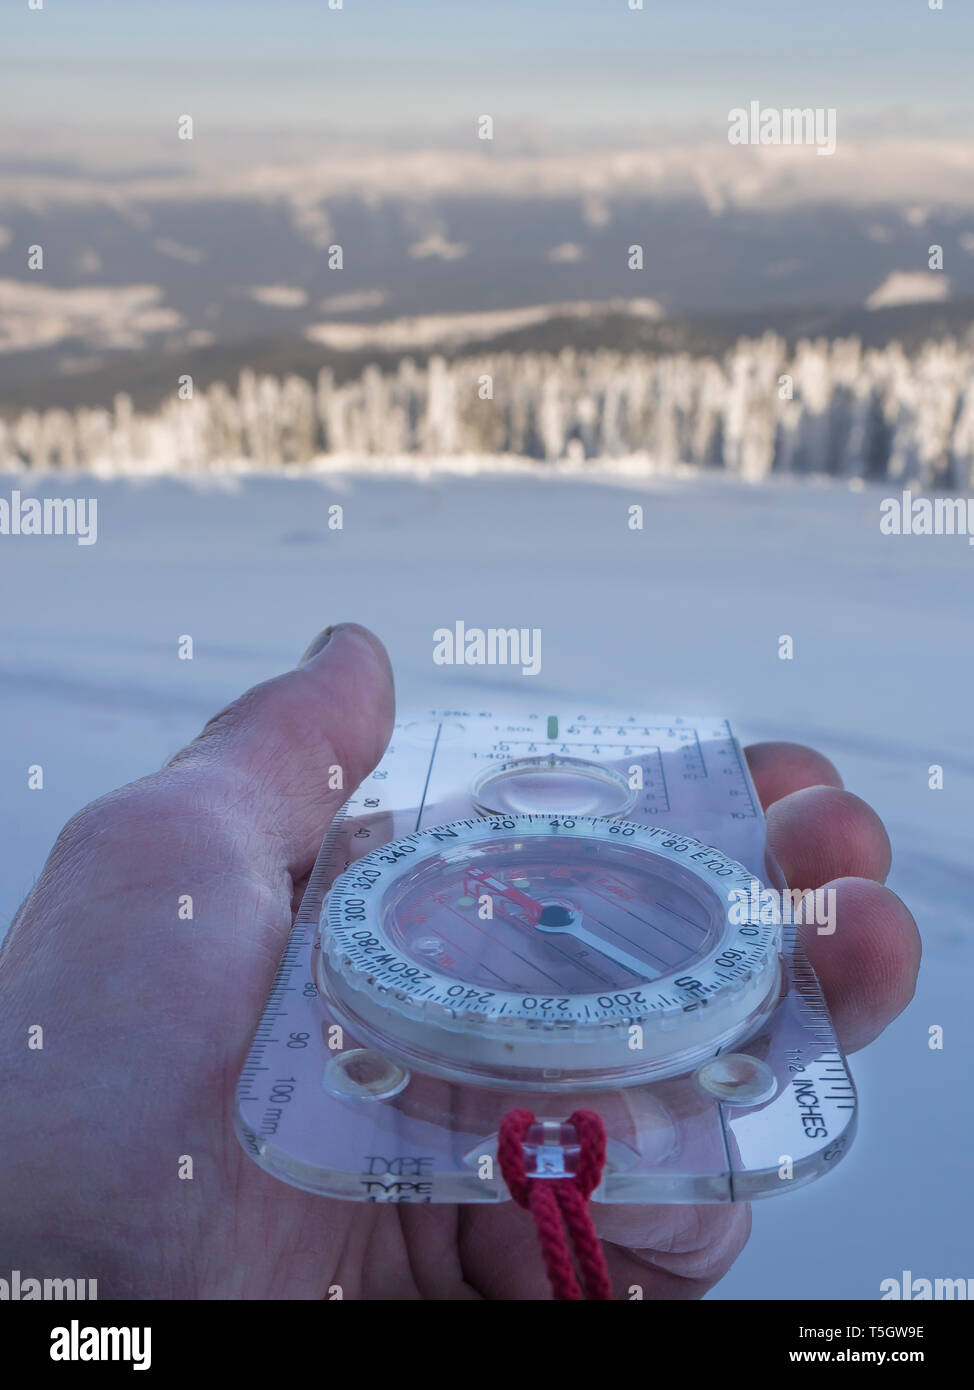 Germany, Upper Bavarian Forest Nature Park, man's hand holding compass in winter Stock Photo